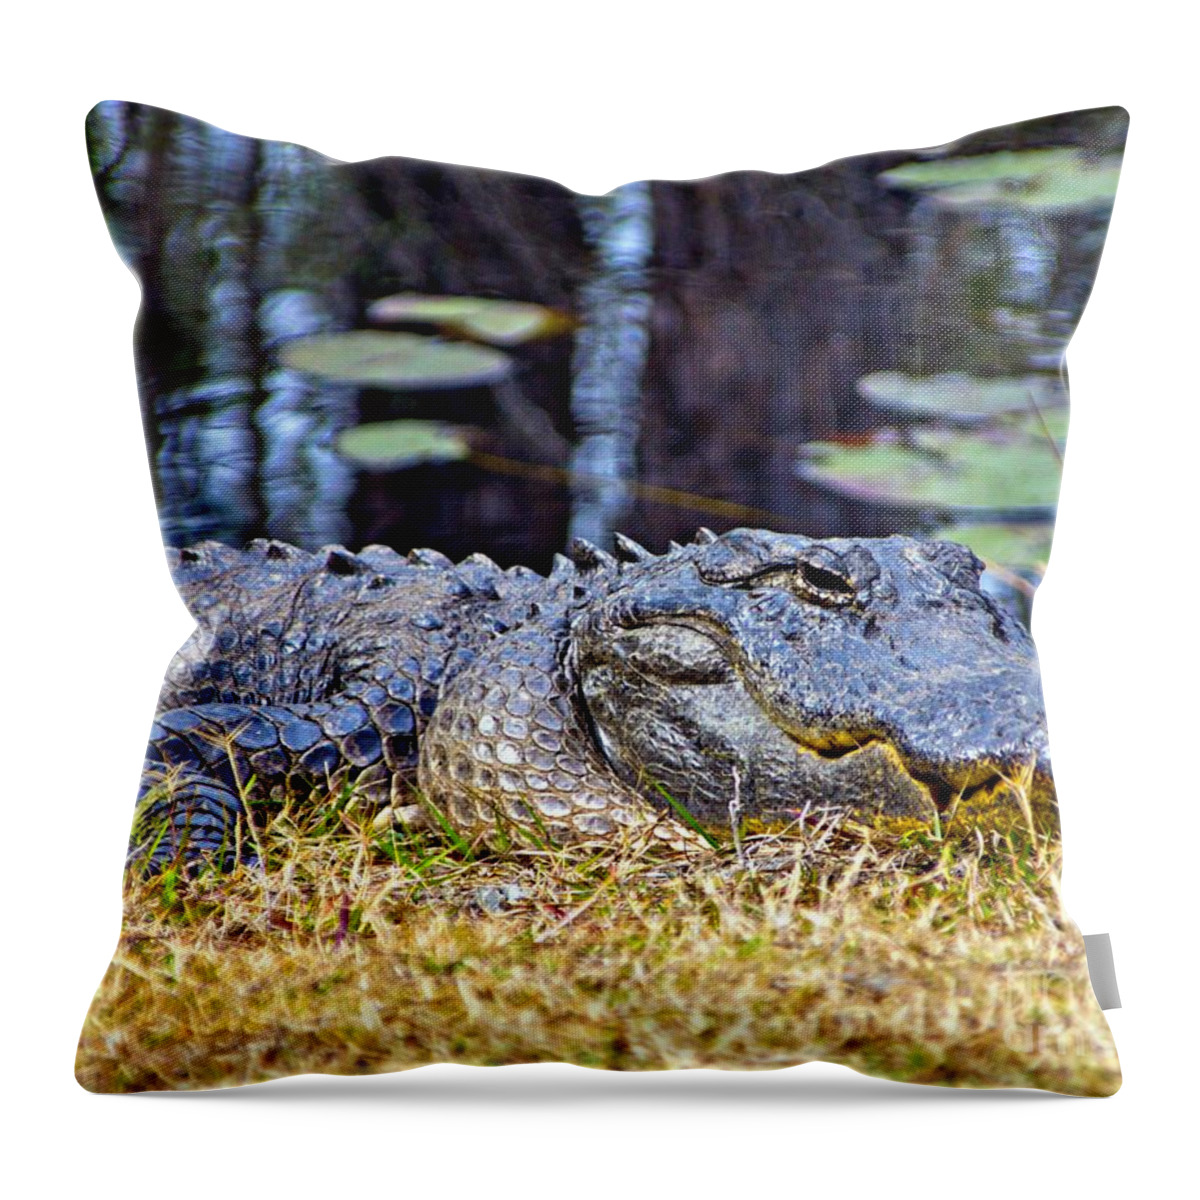 Alligator Throw Pillow featuring the photograph Basking Gator by Southern Photo